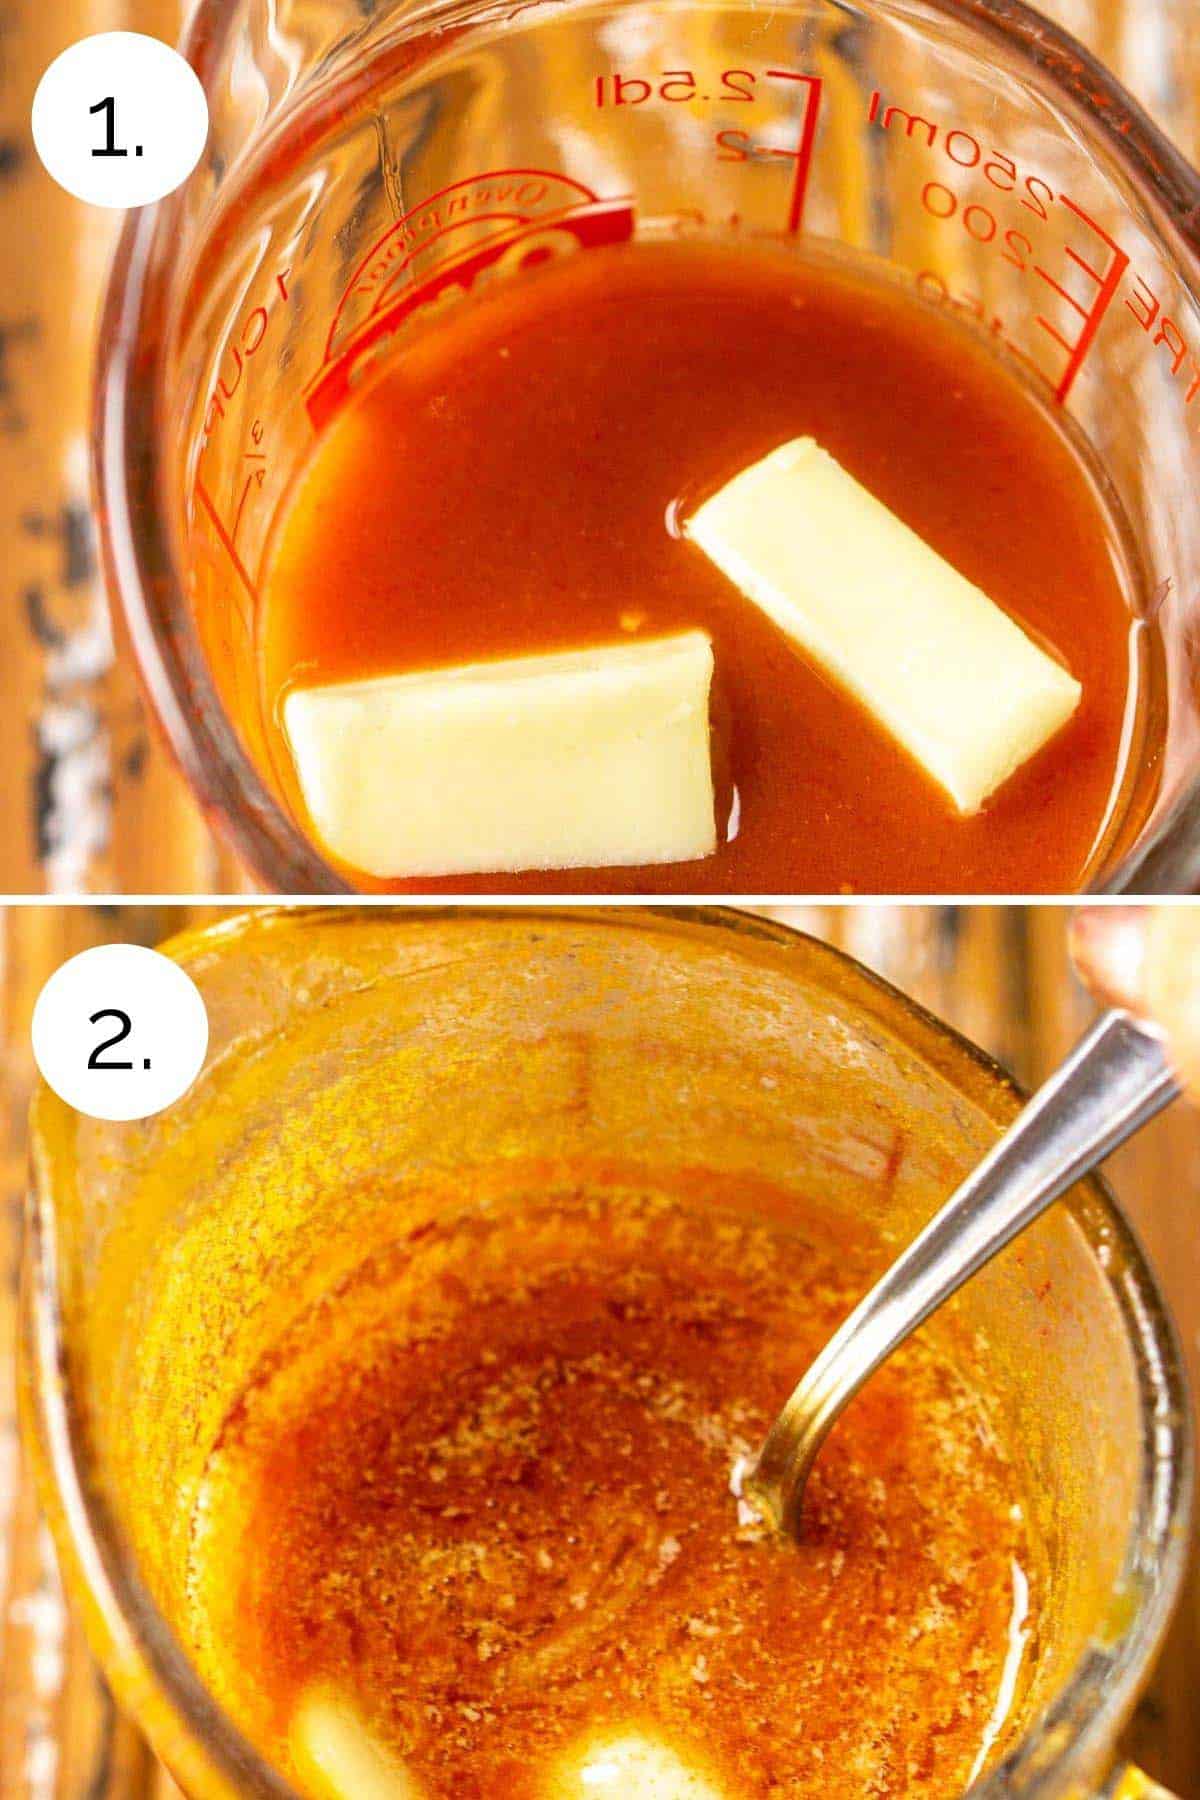 Showing the process of melting the butter with the sauce in a measuring cup.